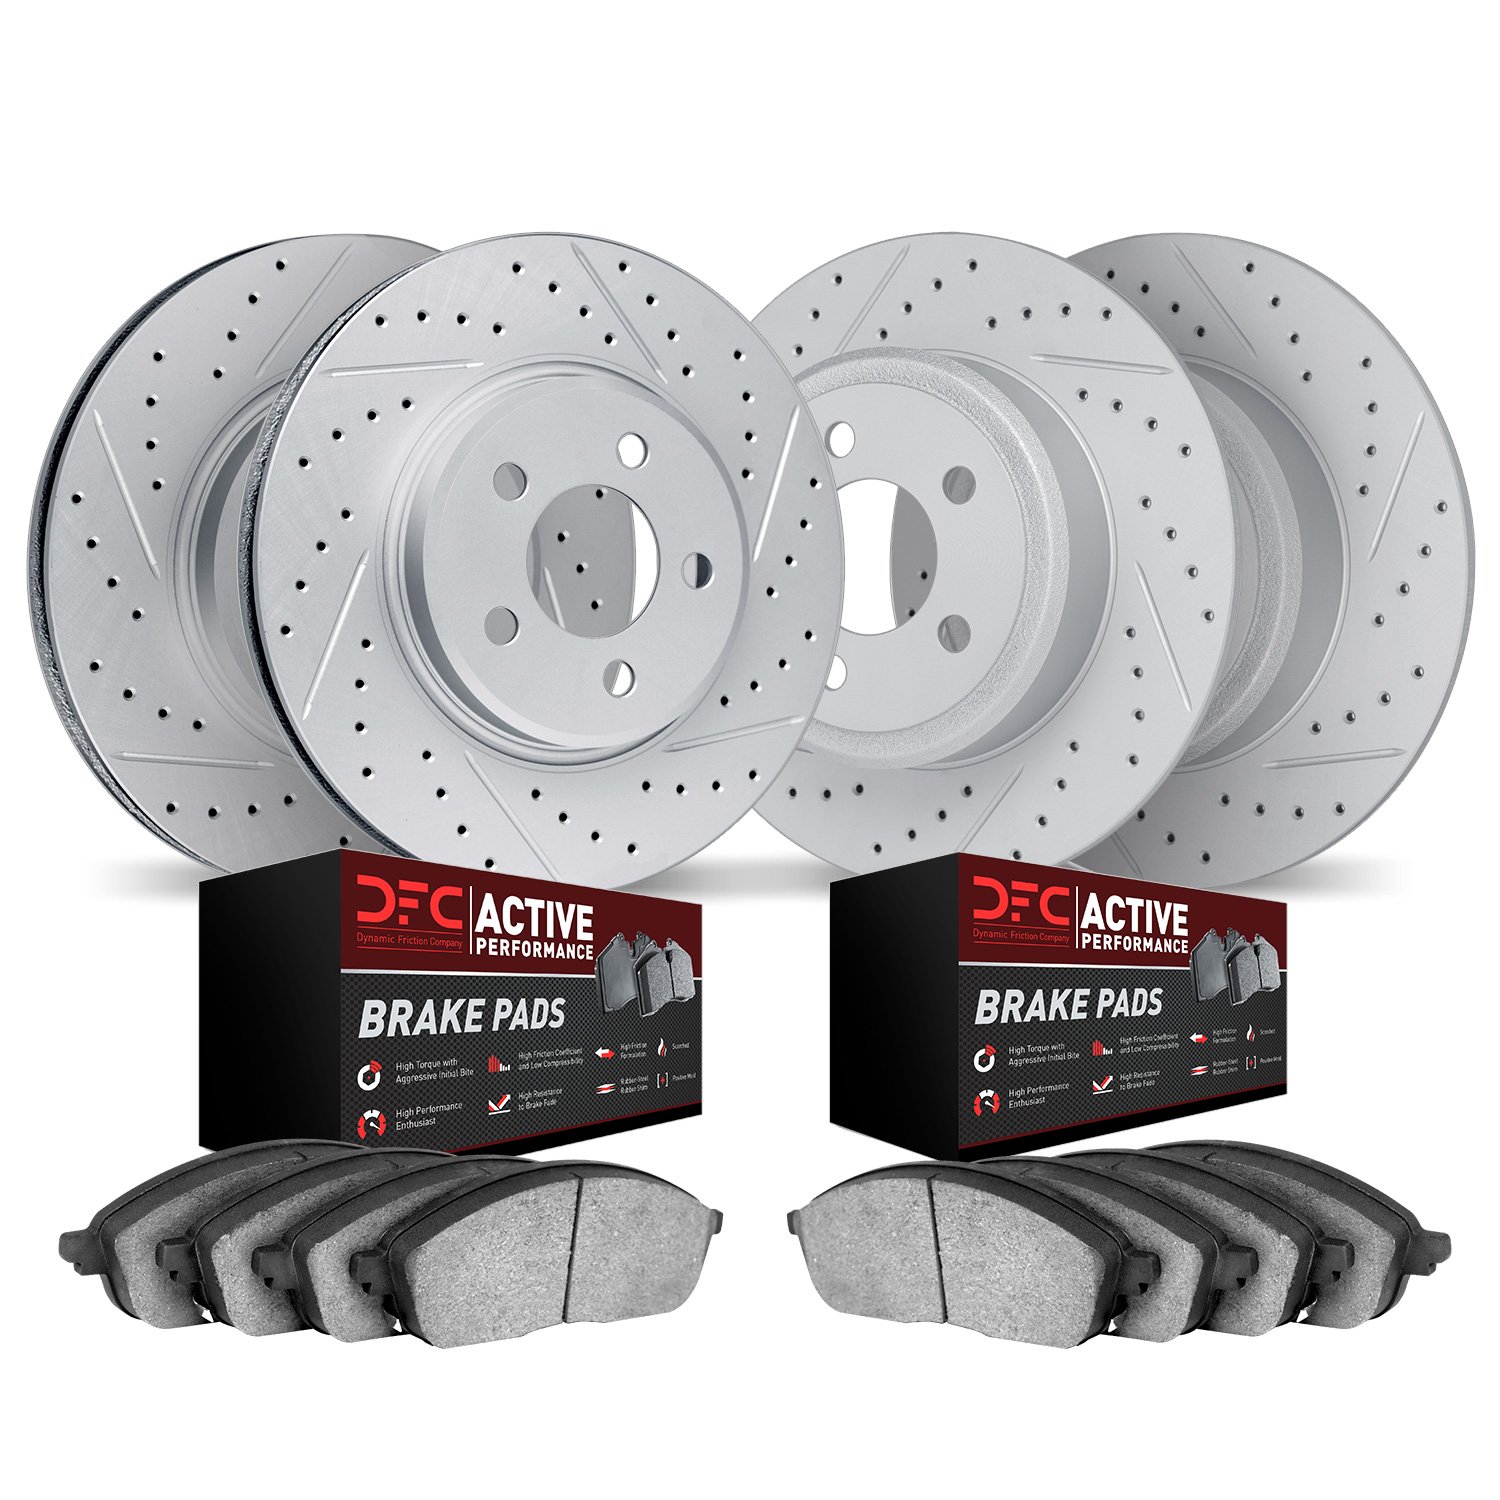 2704-59033 Geoperformance Drilled/Slotted Brake Rotors with Active Performance Pads Kit, 2012-2015 Acura/Honda, Position: Front